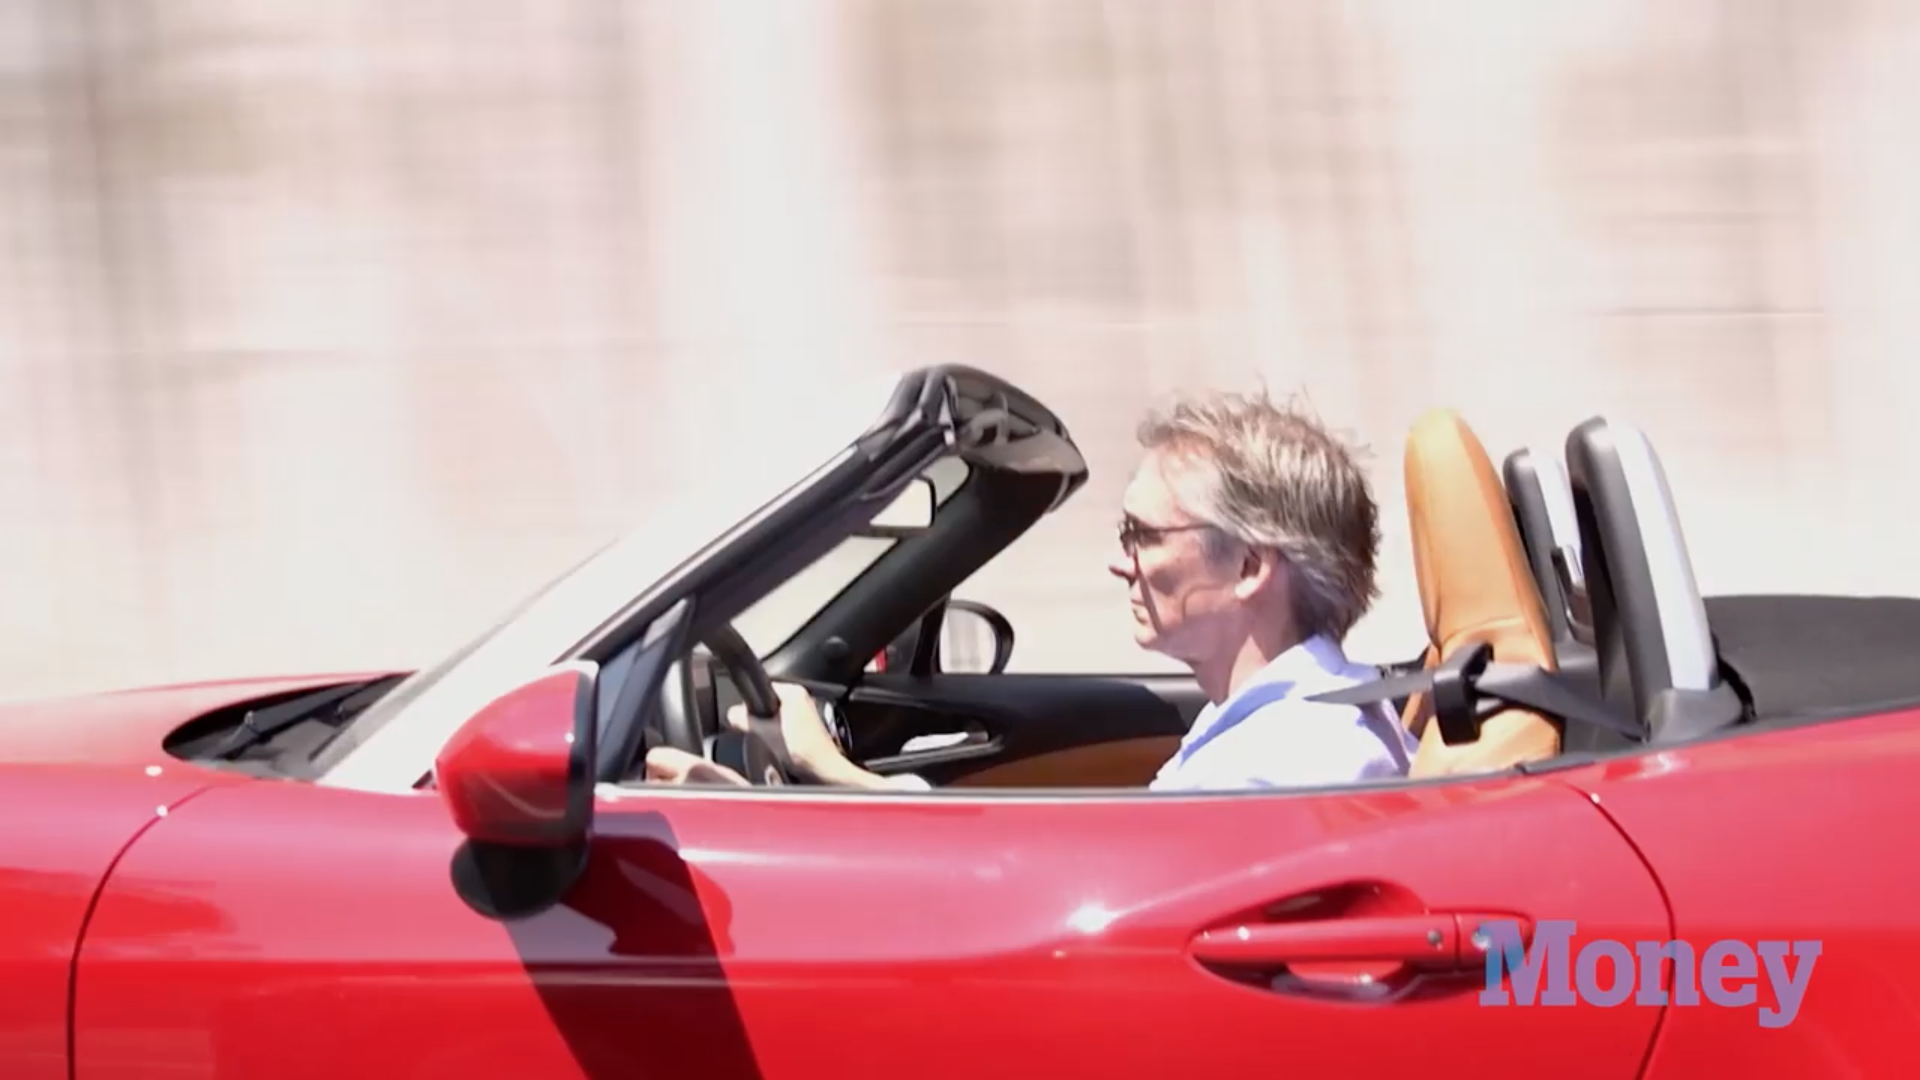 The New Fiat Spider Really Flies...at a Price That Doesn't Sting